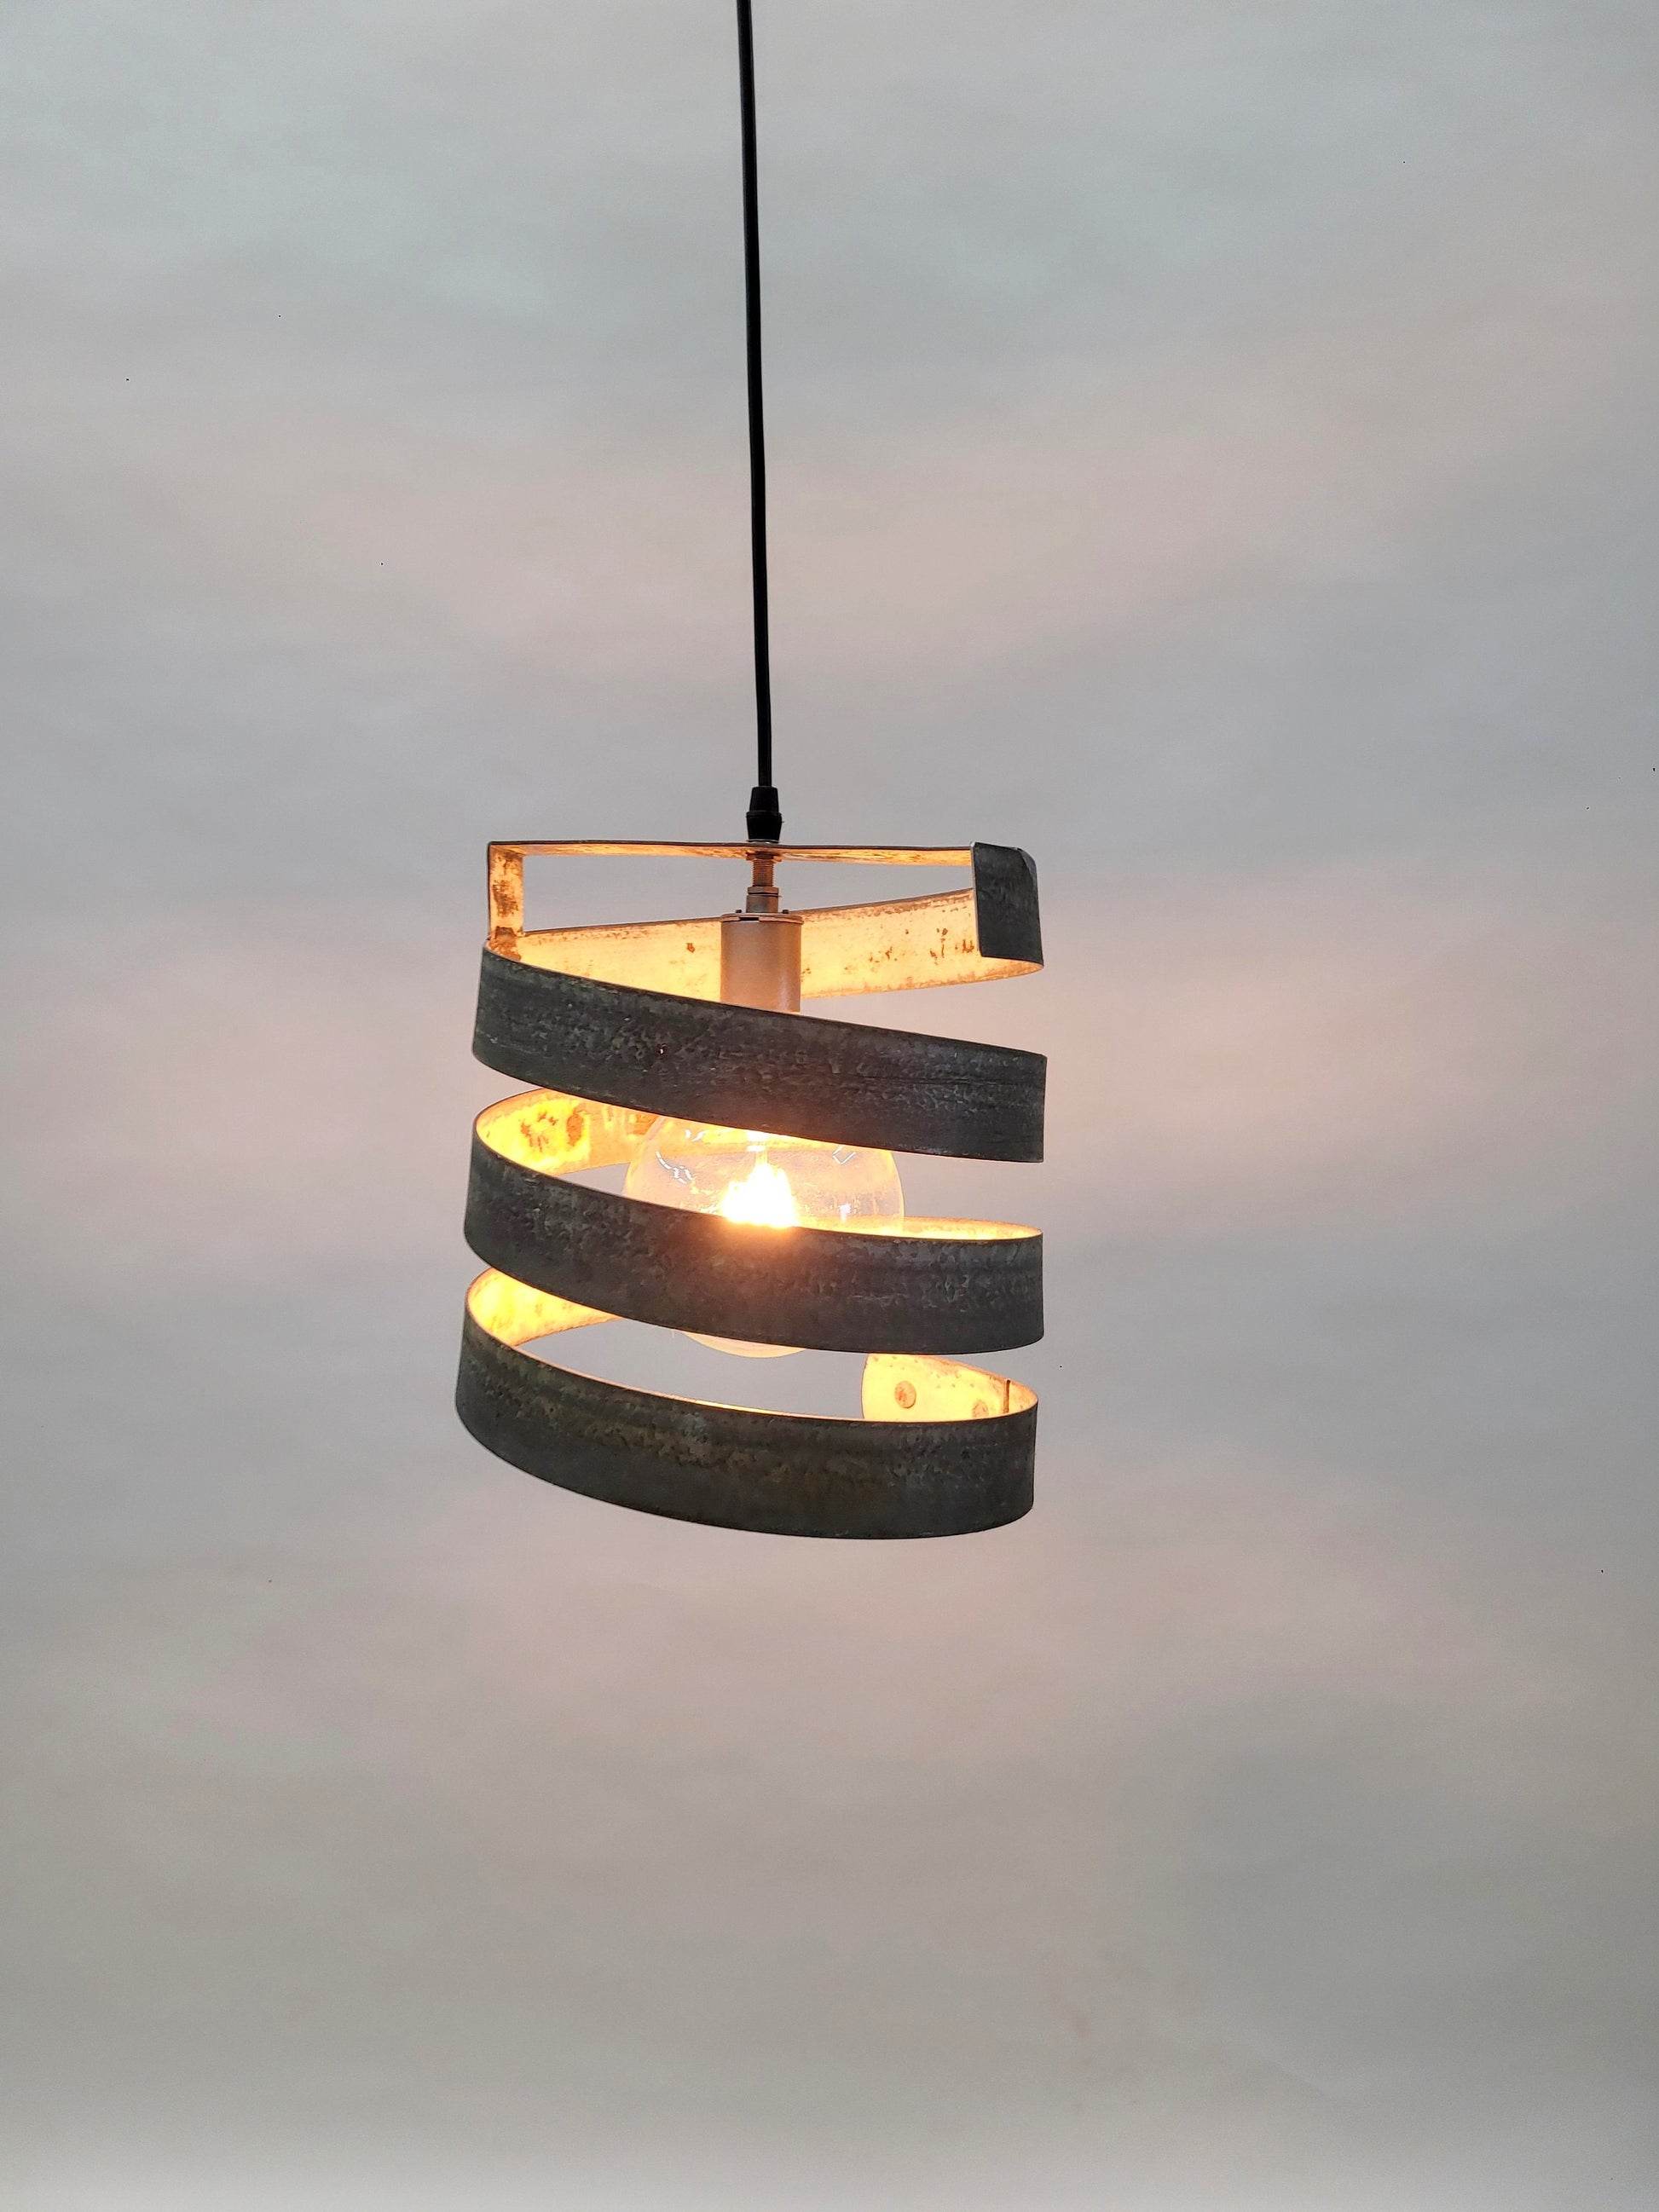 Wine Barrel Ring Pendant Light - TOHATRA 2 - Made from retired California wine barrel rings. 100% Recycled!